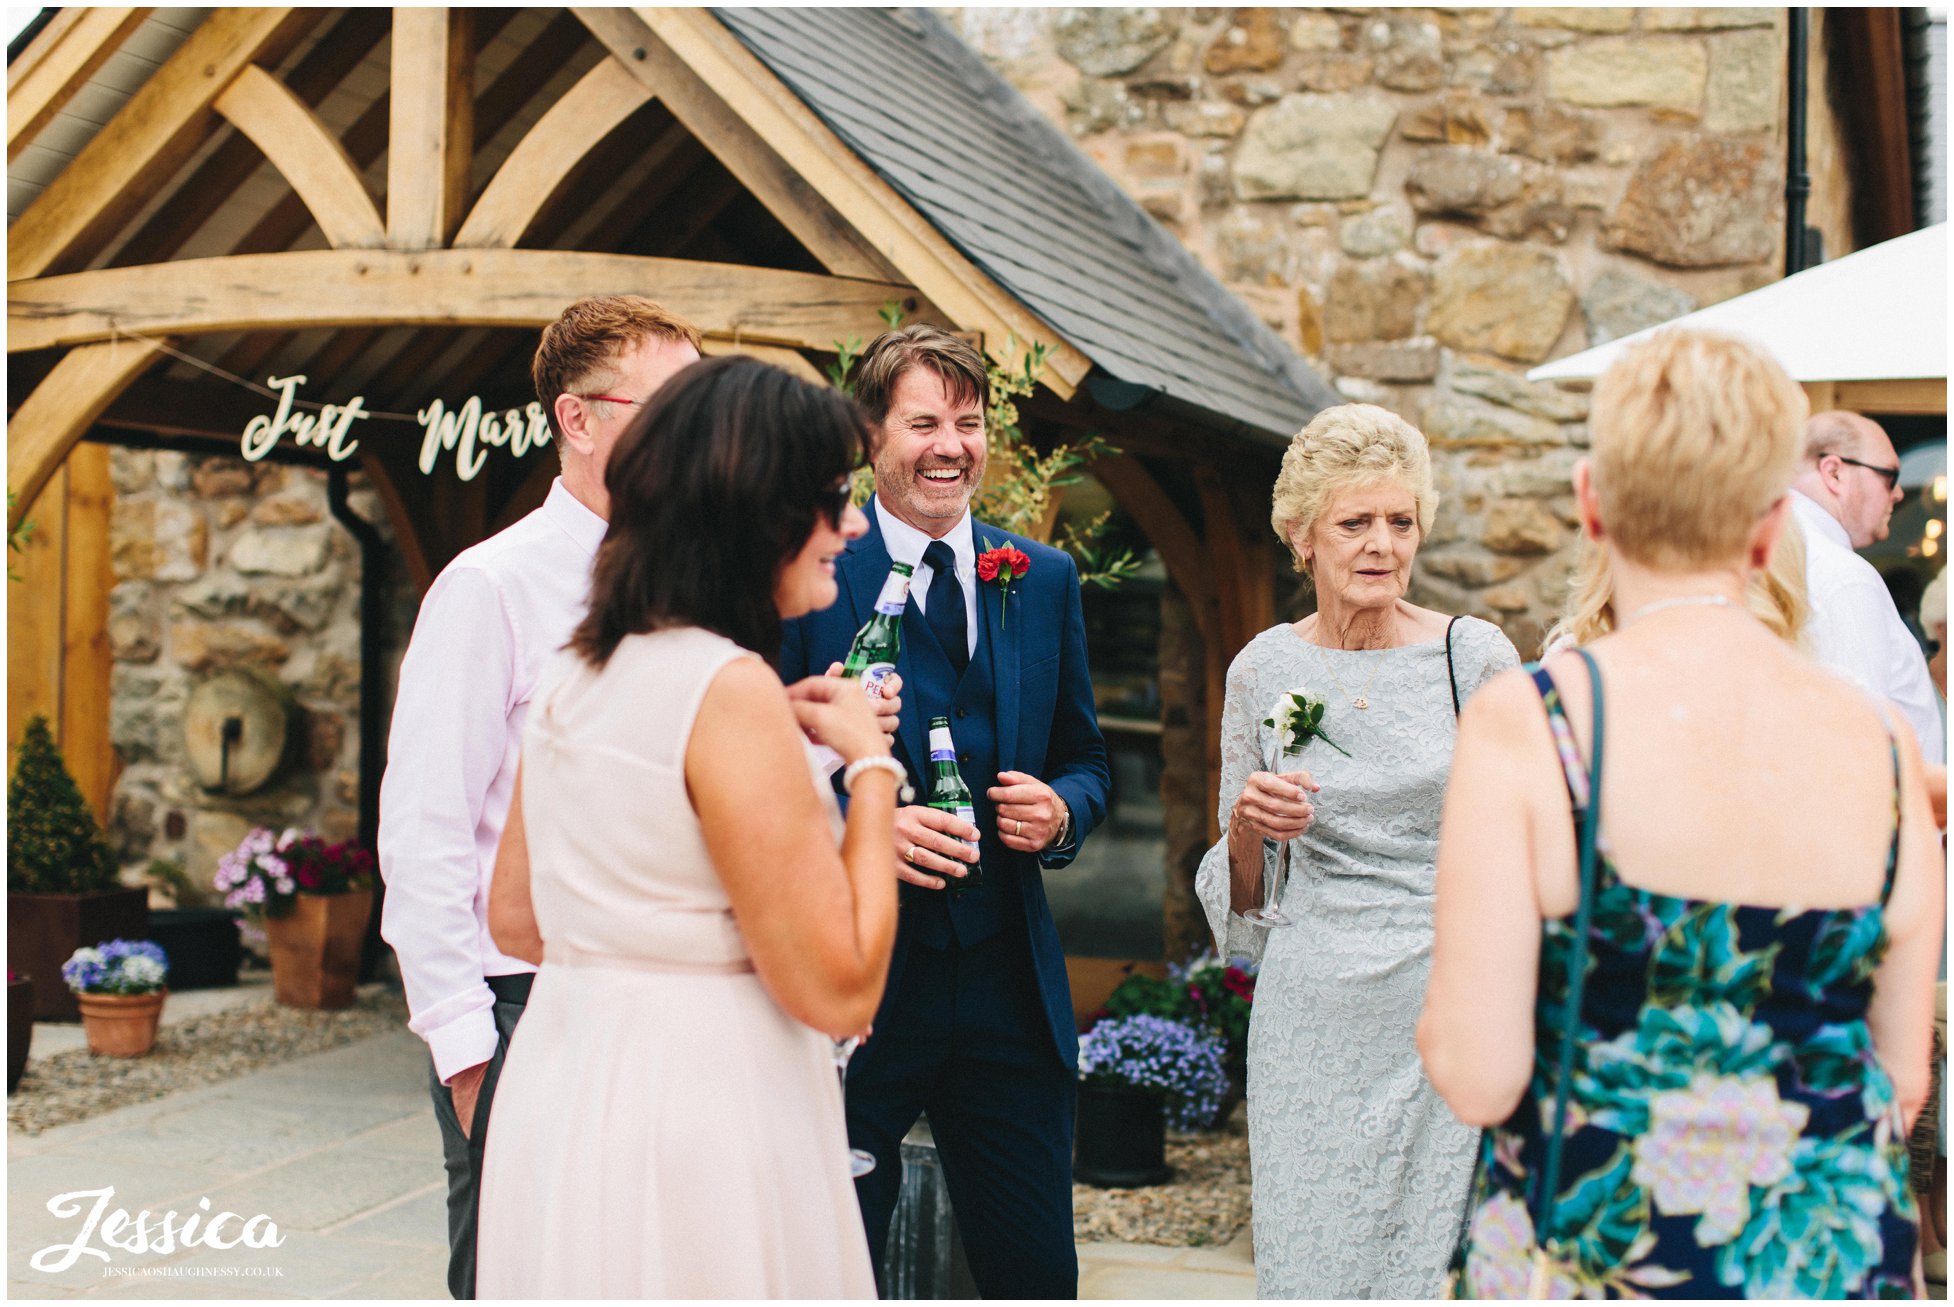 wedding guests laugh together at the drinks reception